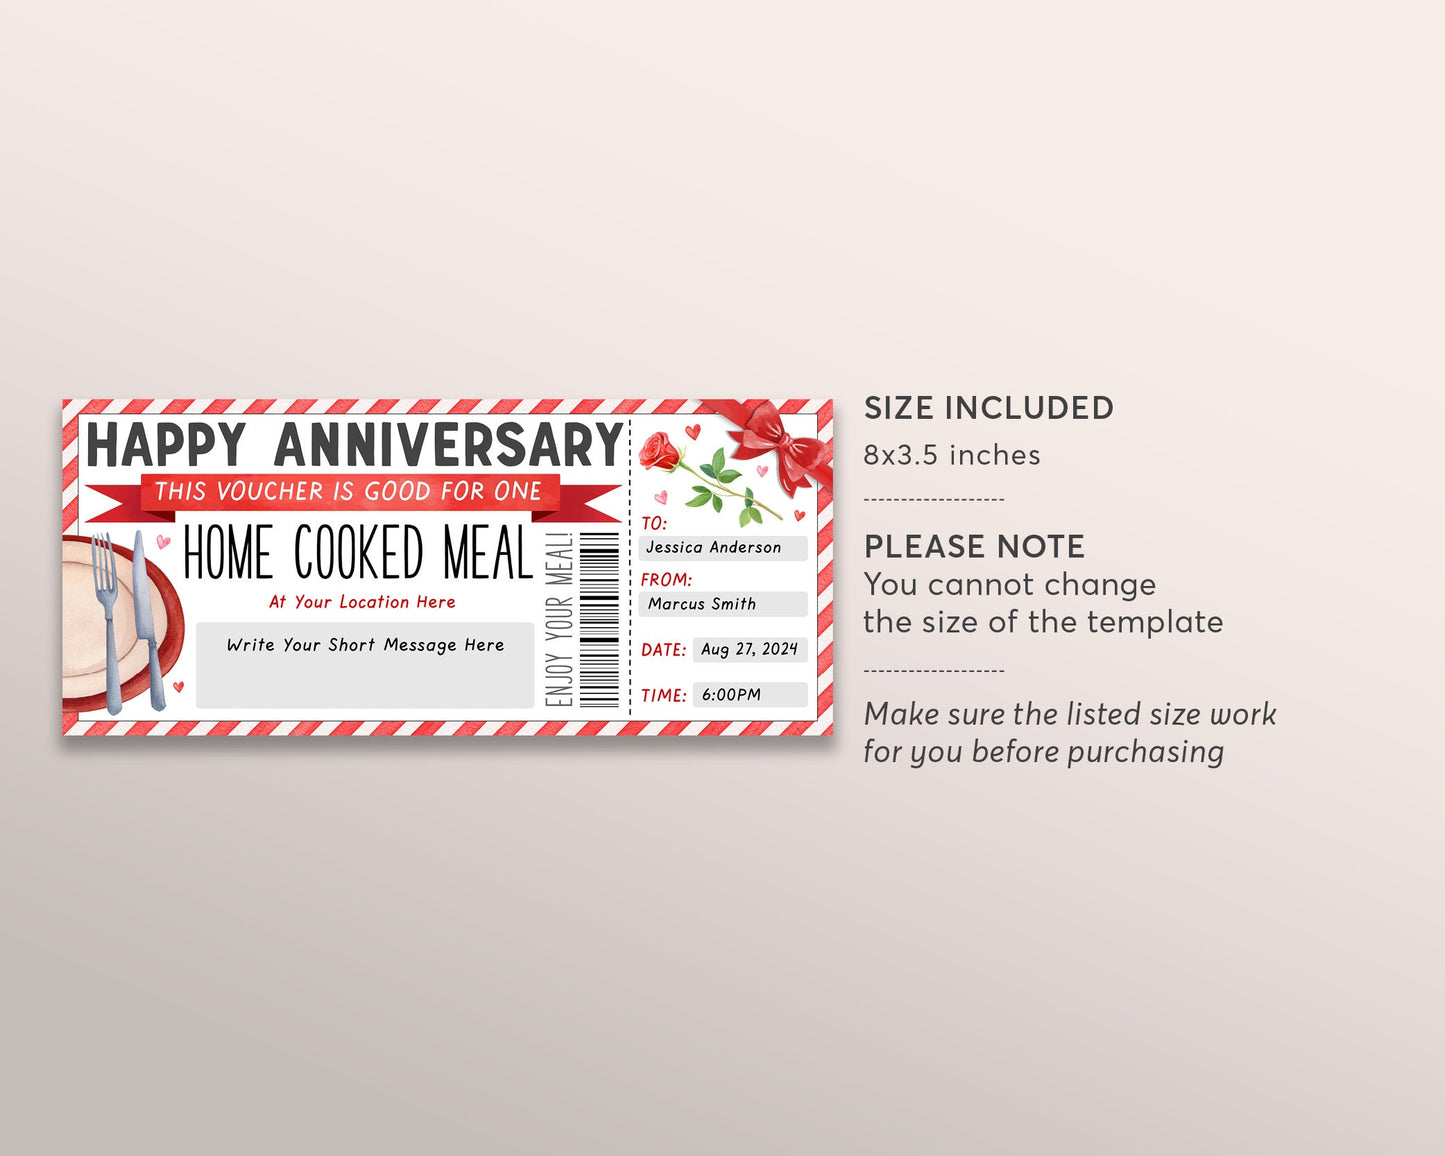 Home Cooked Meal Coupon Editable Template, Anniversary Personal Chef Experience Dinner Gift Voucher For Wife Husband Gift Certificate